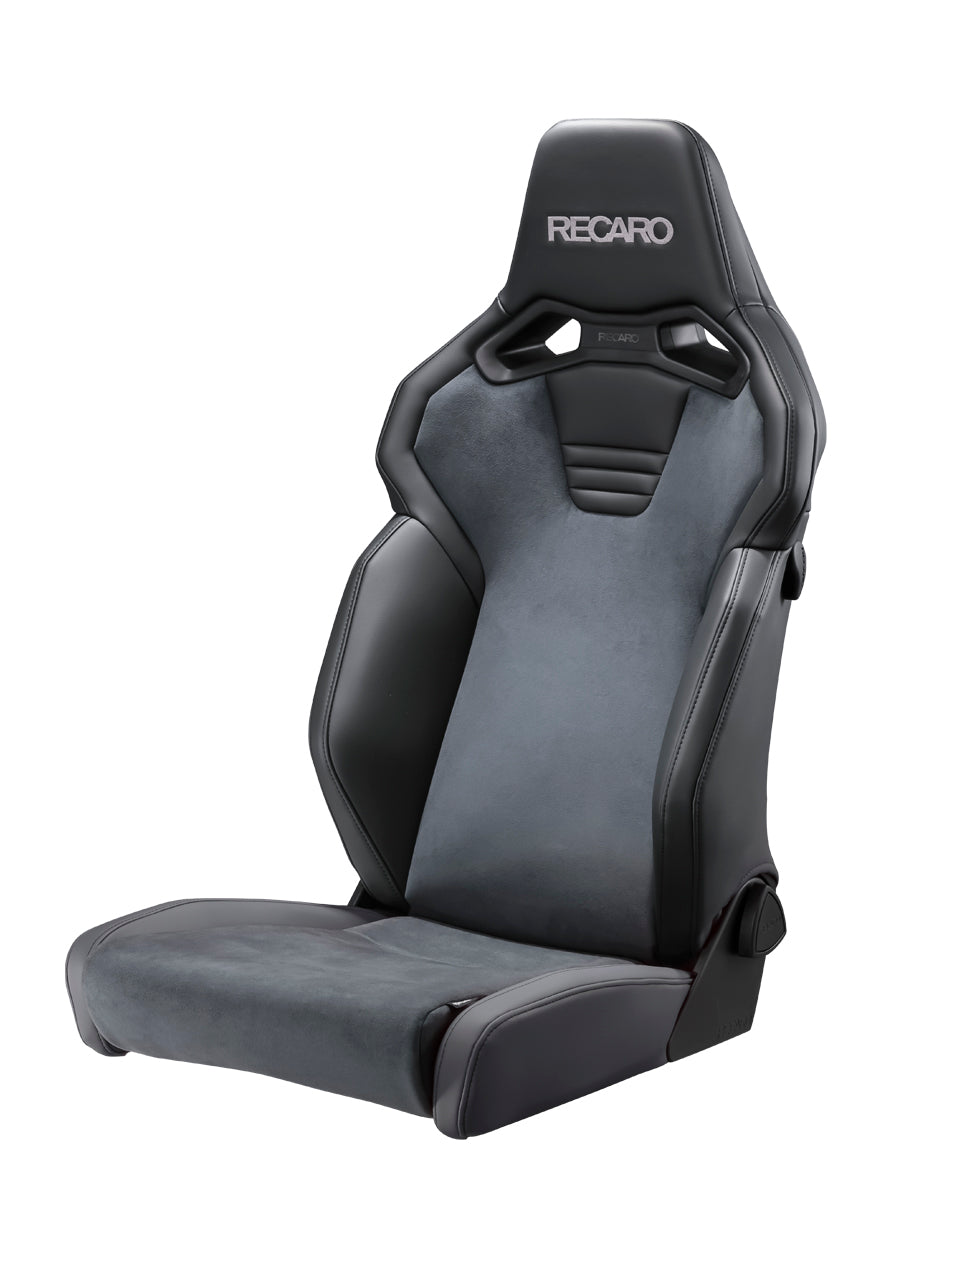 RECARO SR-C UT100 CG BK ARTIFICIAL LEATHER BLACK COLOR AND ULTRA SUEDE CHARCOAL GRAY COLOR SEAT FOR  81-121.20.645-0